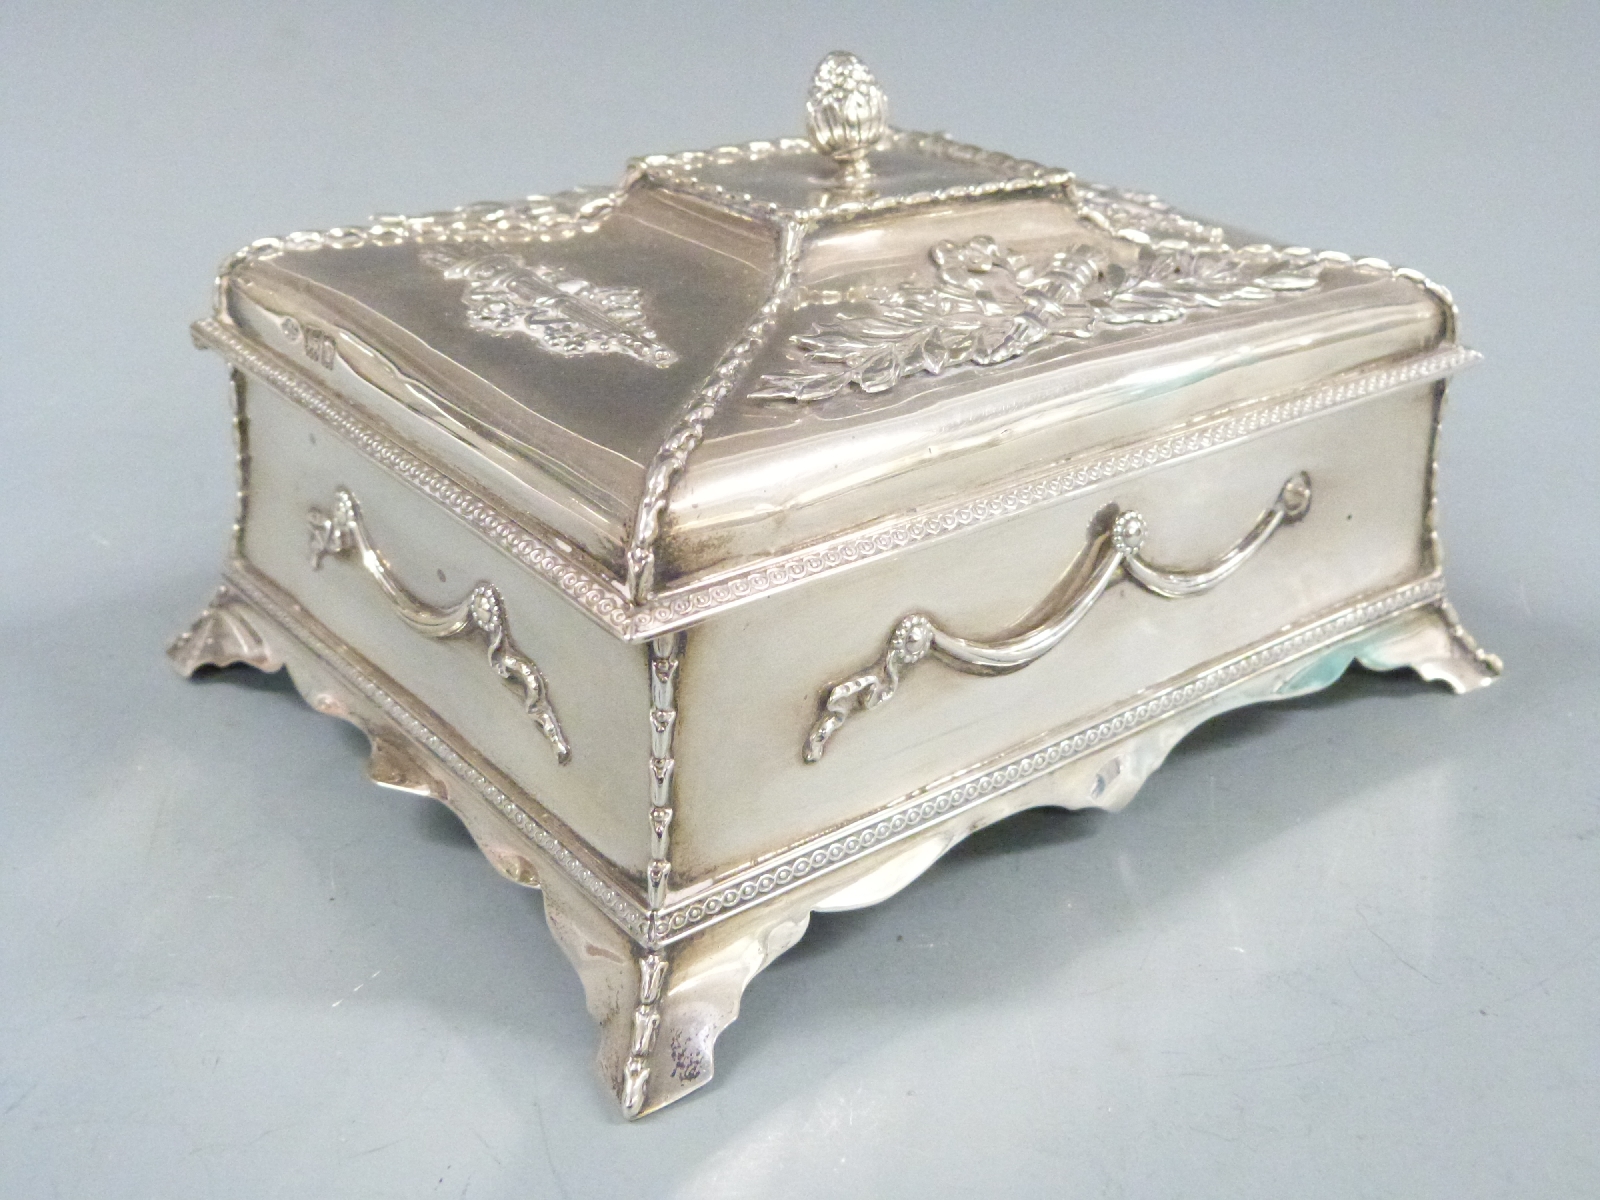 Edward VII hallmarked silver jewellery box with embossed decoration, London 1904 maker William - Image 2 of 5